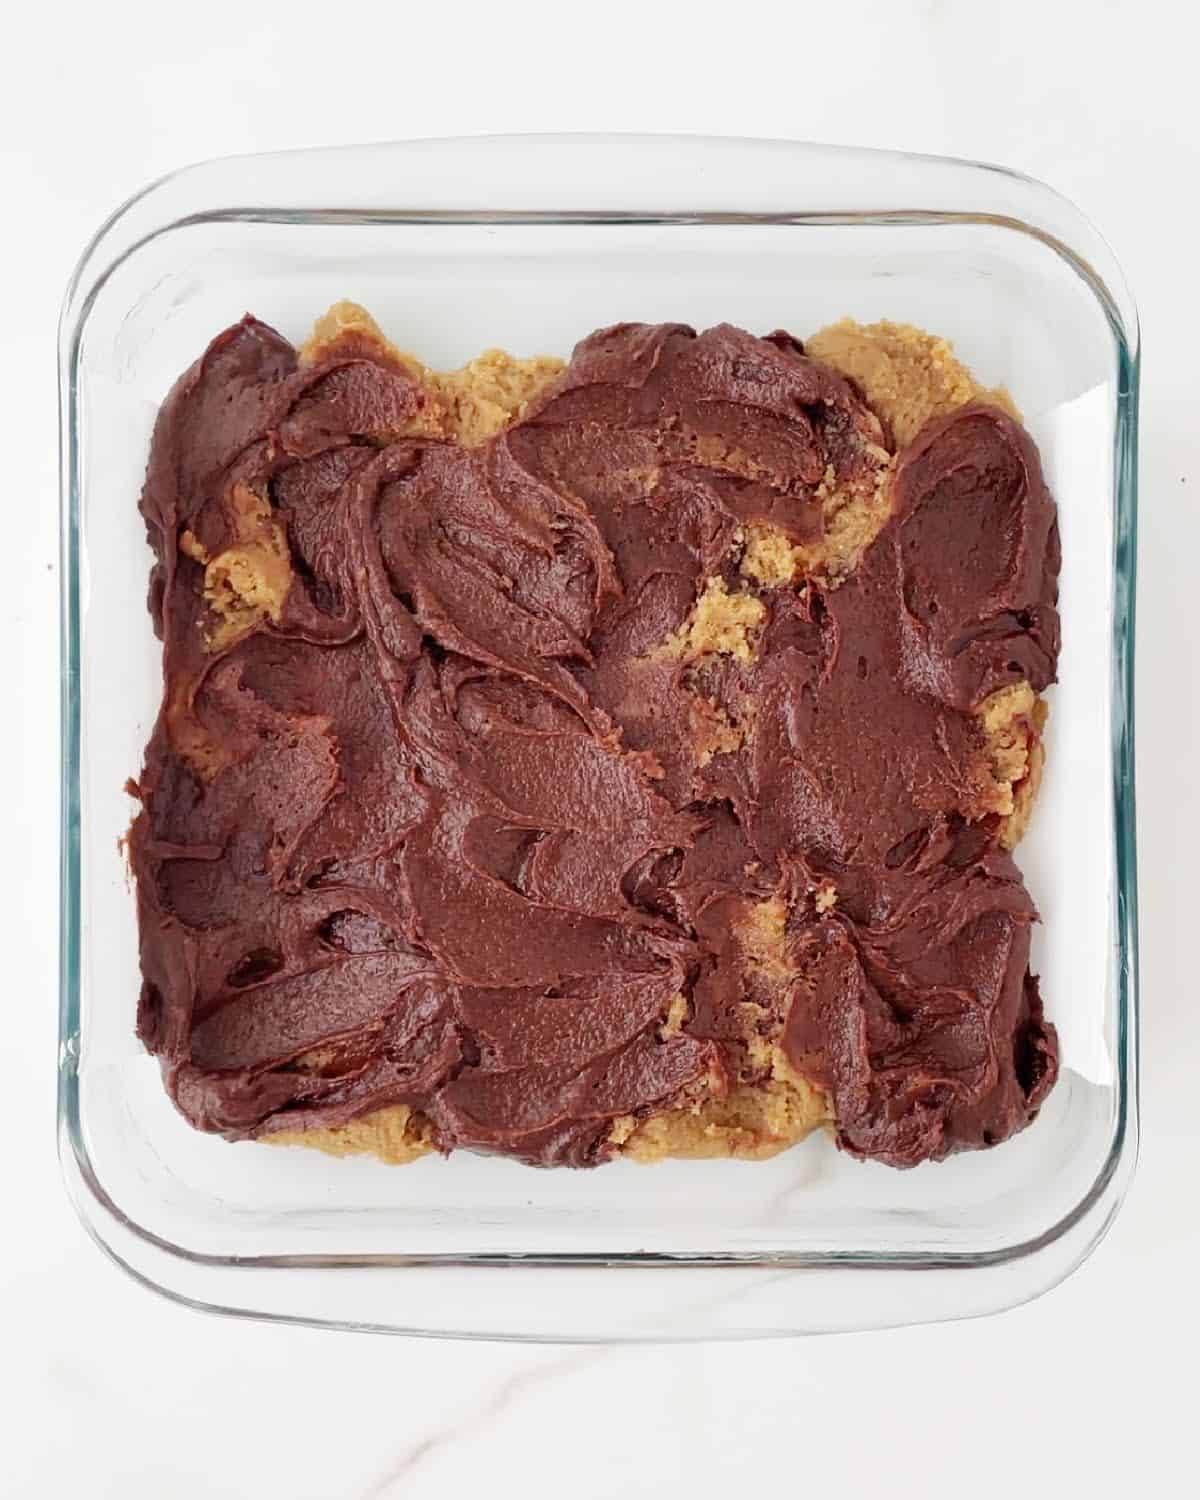 Marbled cookie and brownie dough in a glass square dish on a white marble surface.